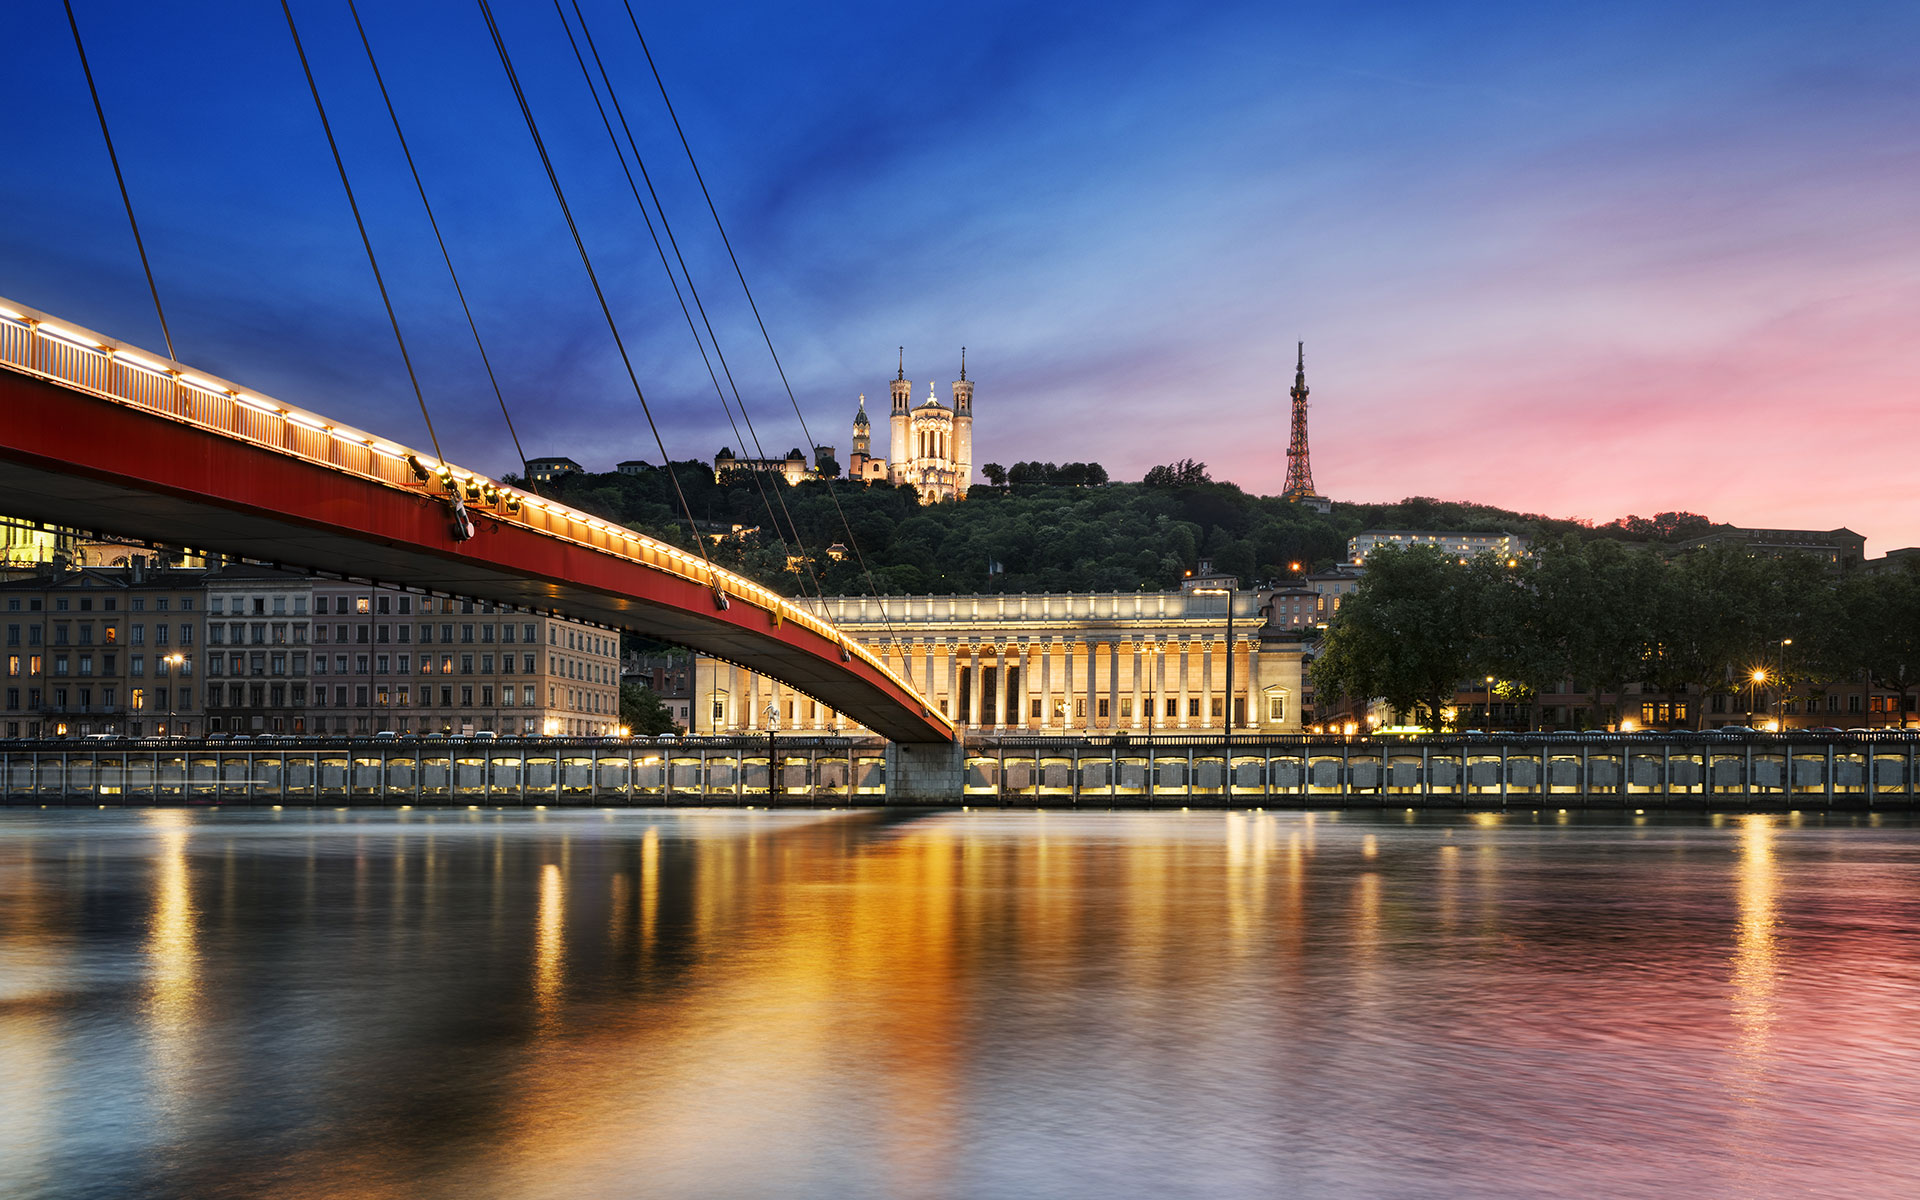 The Saone River in Lyon at sunset (photo © Beatrice Preve / dreamstime.com).